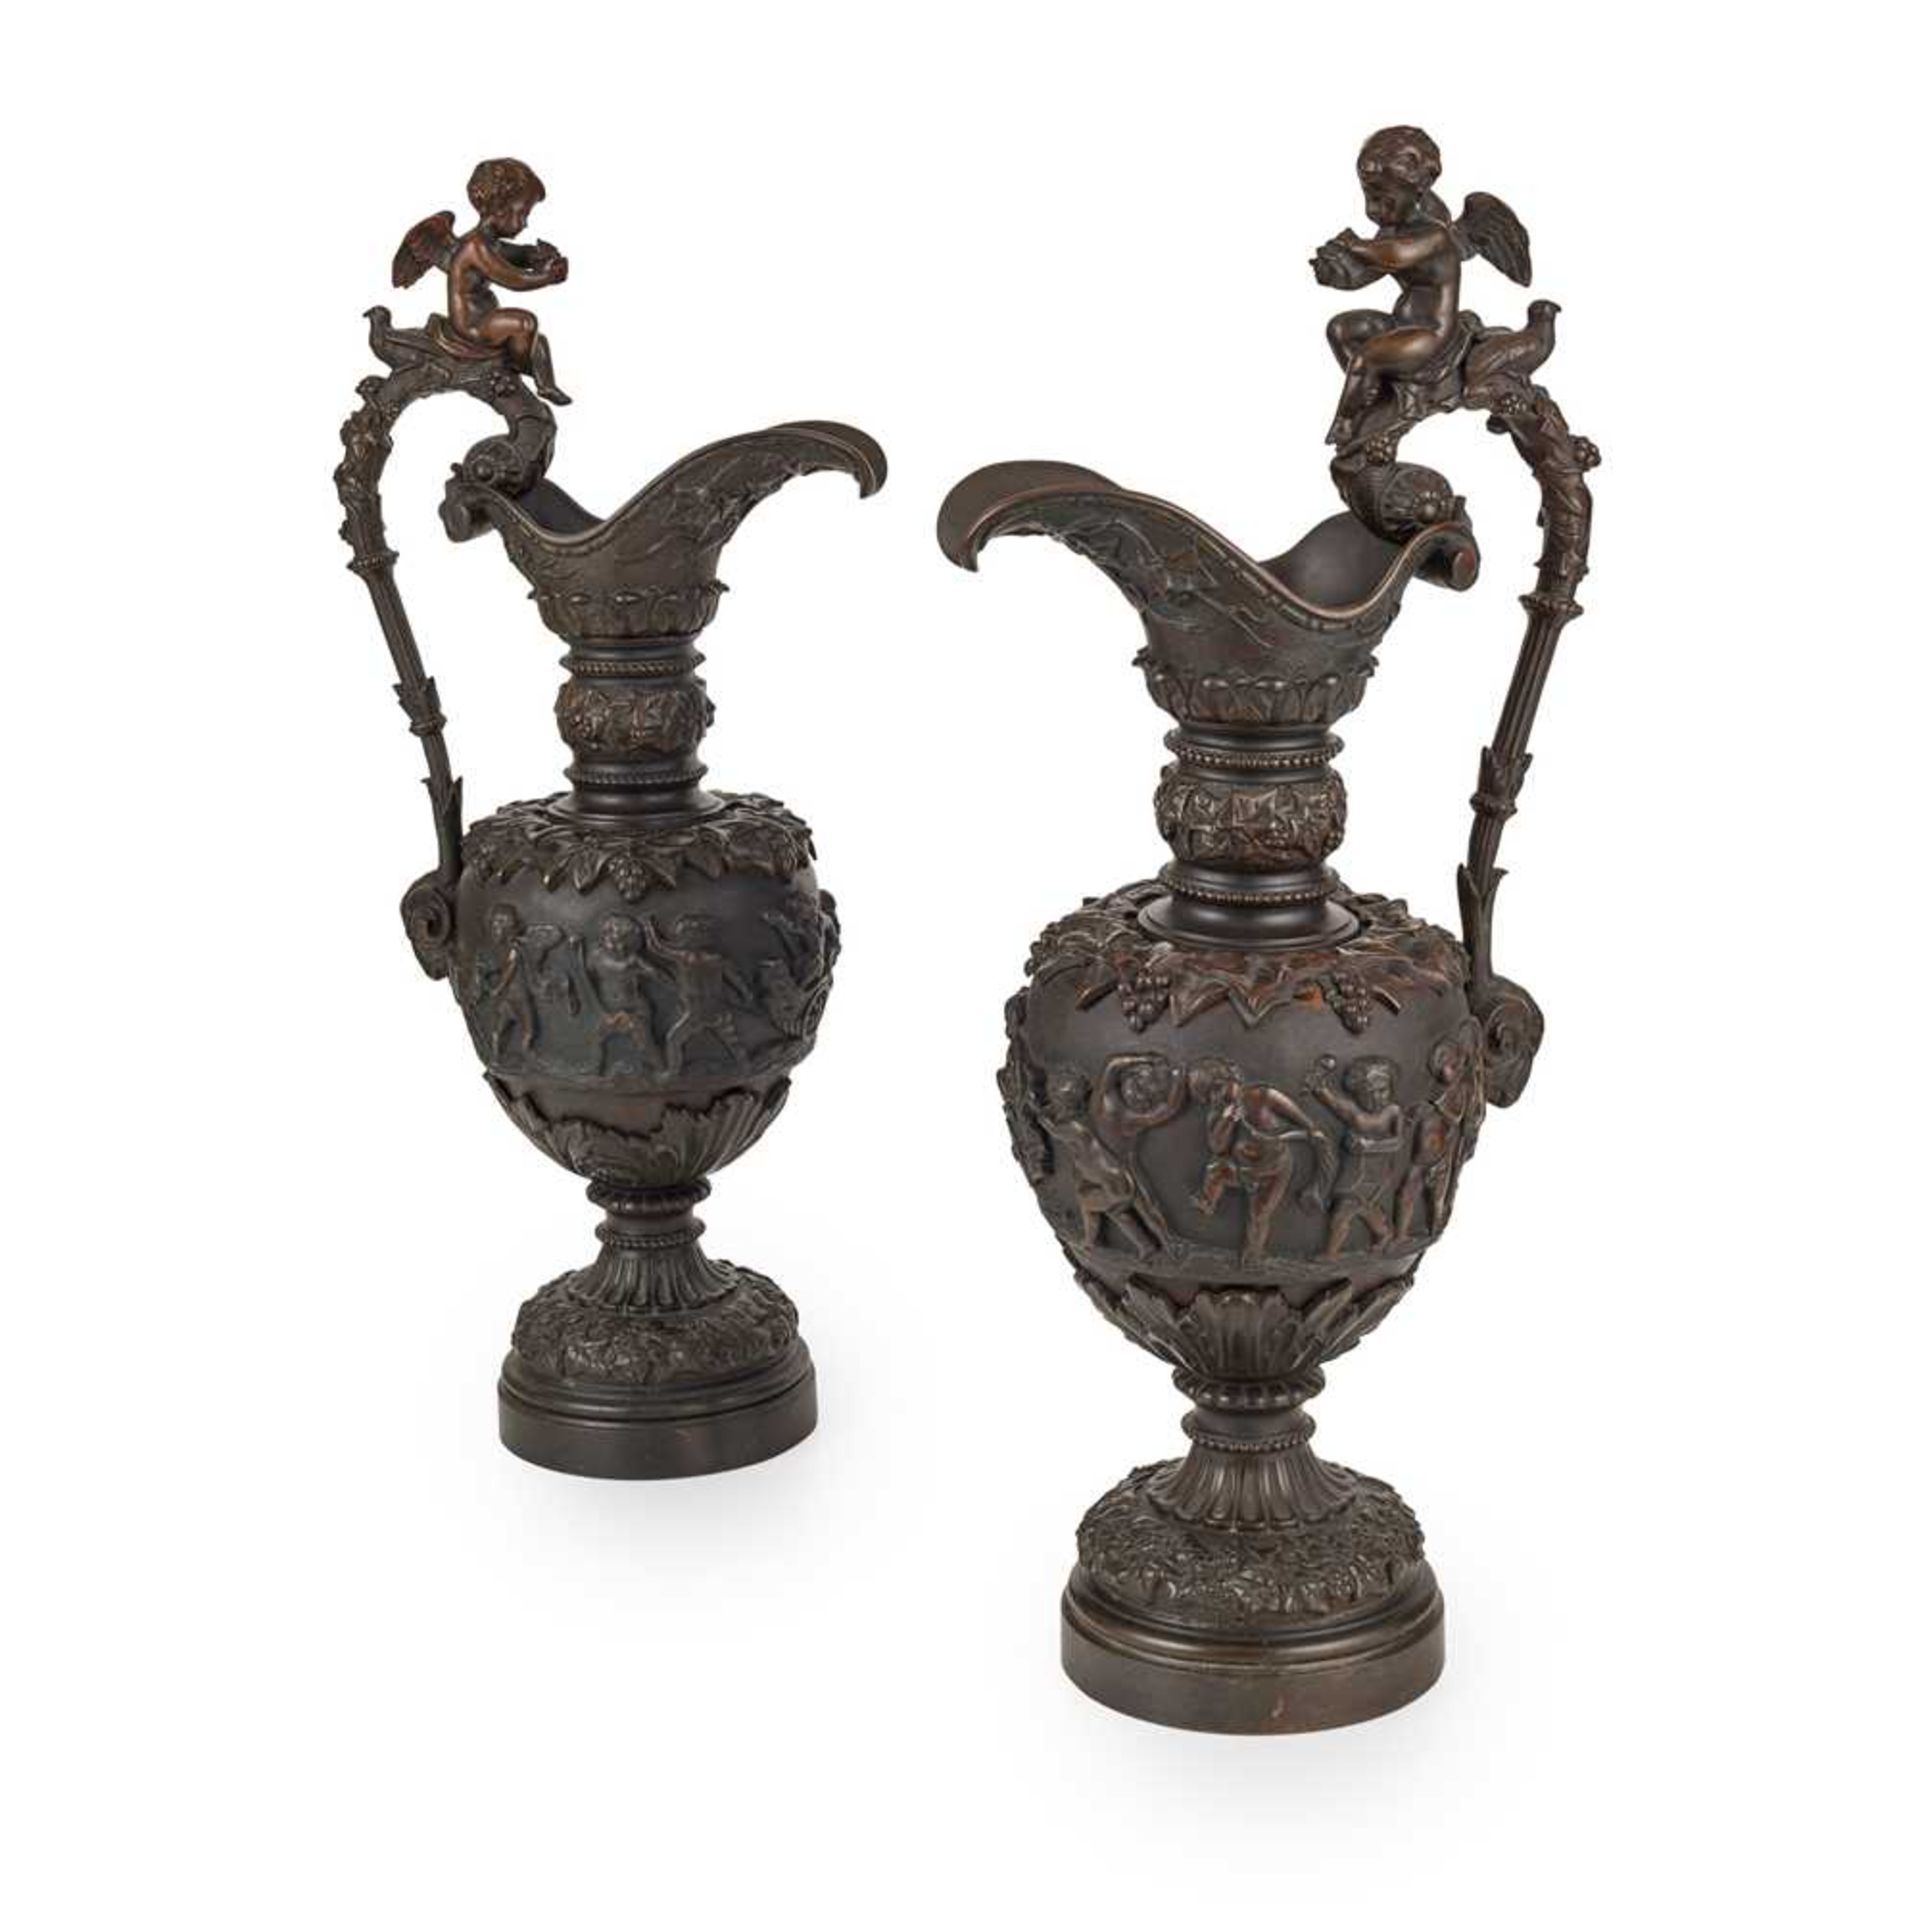 PAIR OF FRENCH RENAISSANCE STYLE BRONZE EWERS 19TH CENTURY - Image 2 of 2